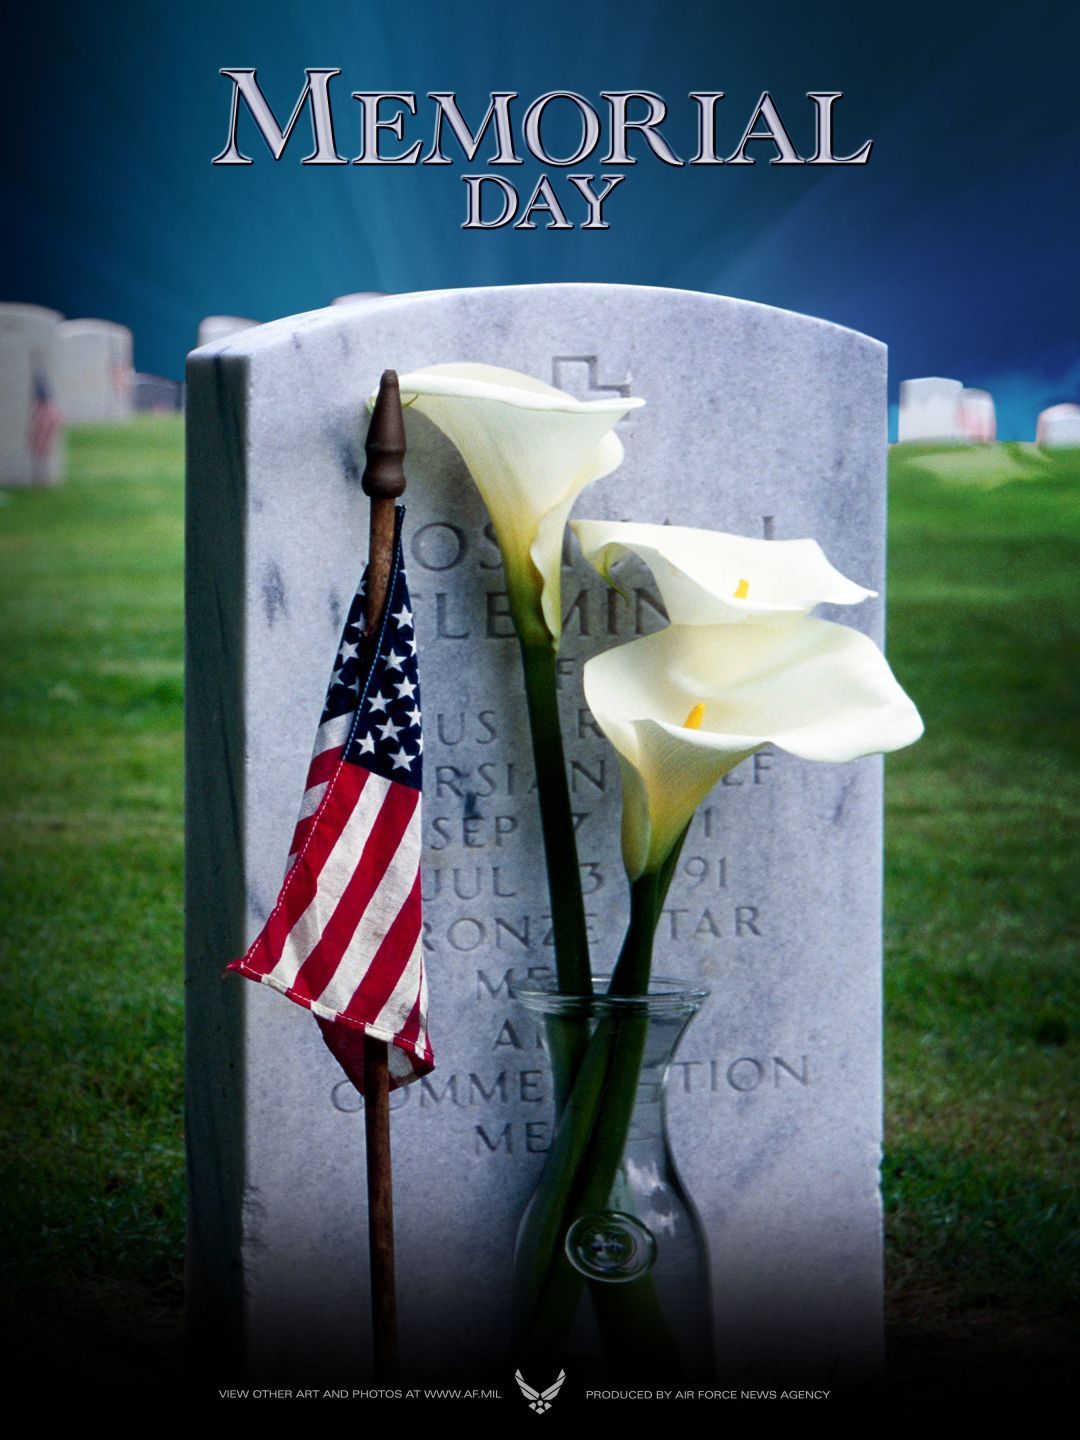 Free download [50] Memorial Day Android iPhone Desktop HD Background [1080x1440] for your Desktop, Mobile & Tablet. Explore Memorial Day 2020 Wallpaper. Memorial Day 2020 Wallpaper, Memorial Day Wallpaper, Memorial Day Wallpaper